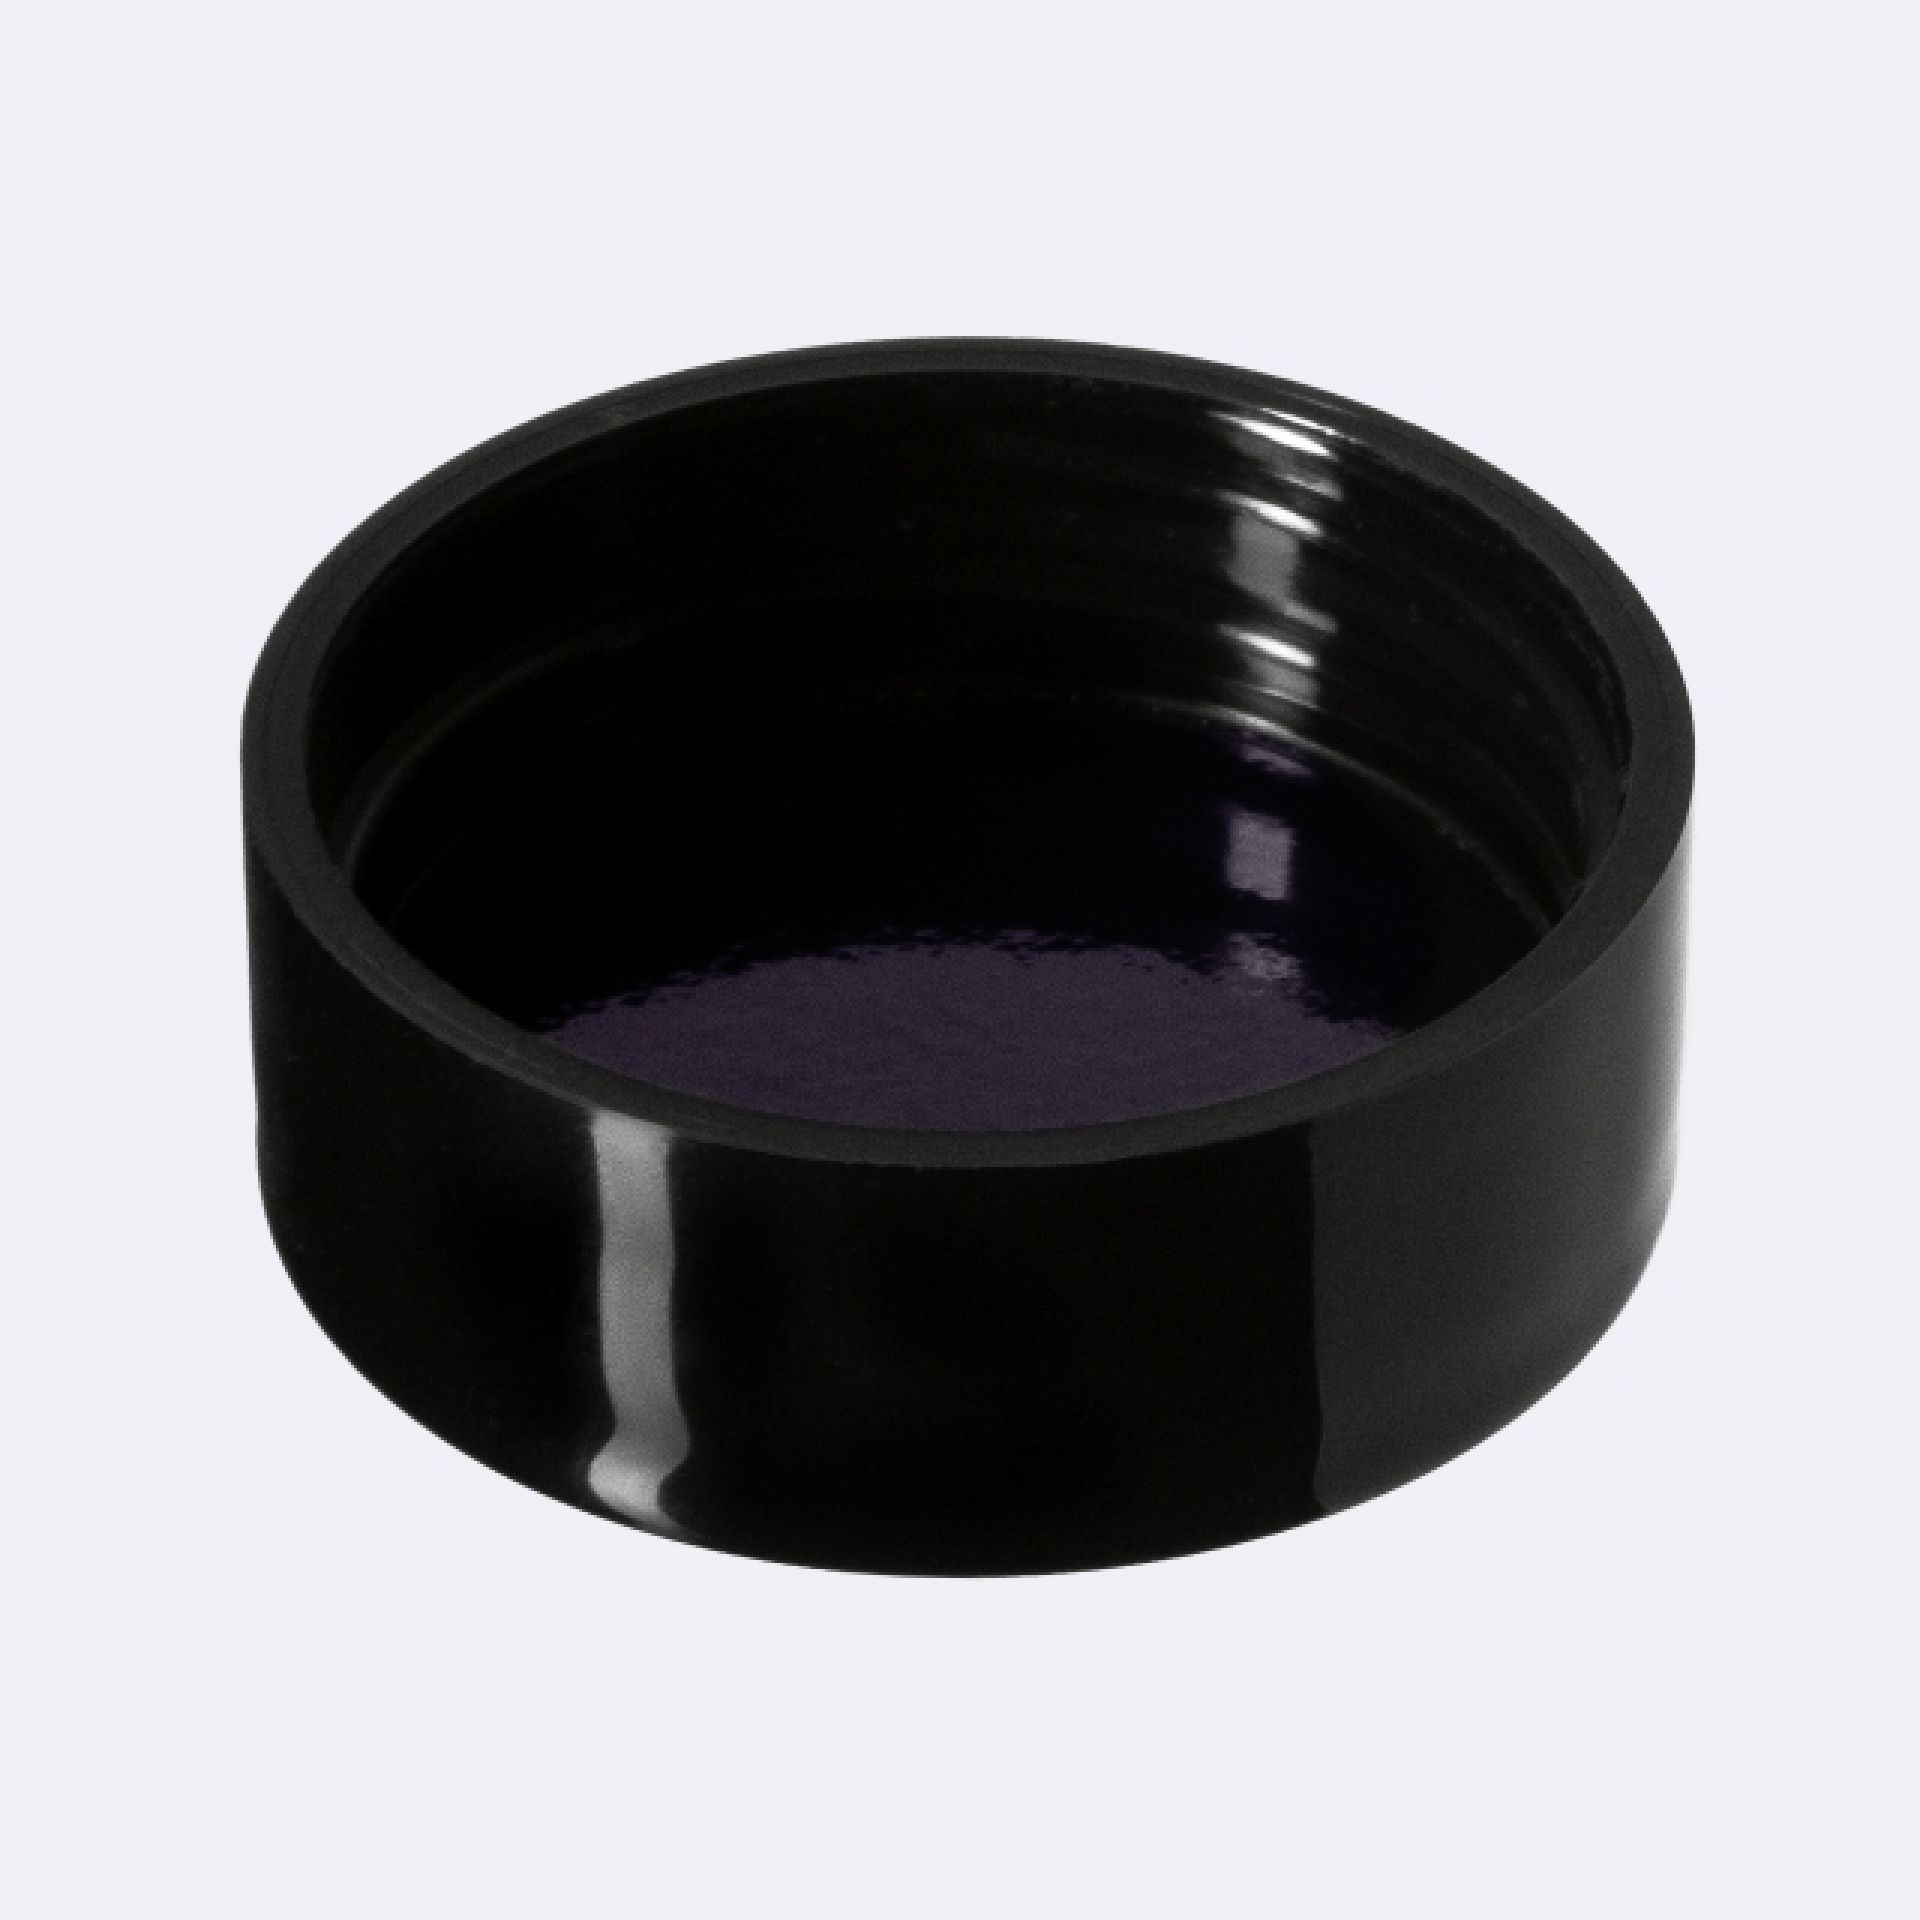 Lid Modern 30 special, UREA, black, semi-glossy finish, violet Phan inlay (Ceres 5)